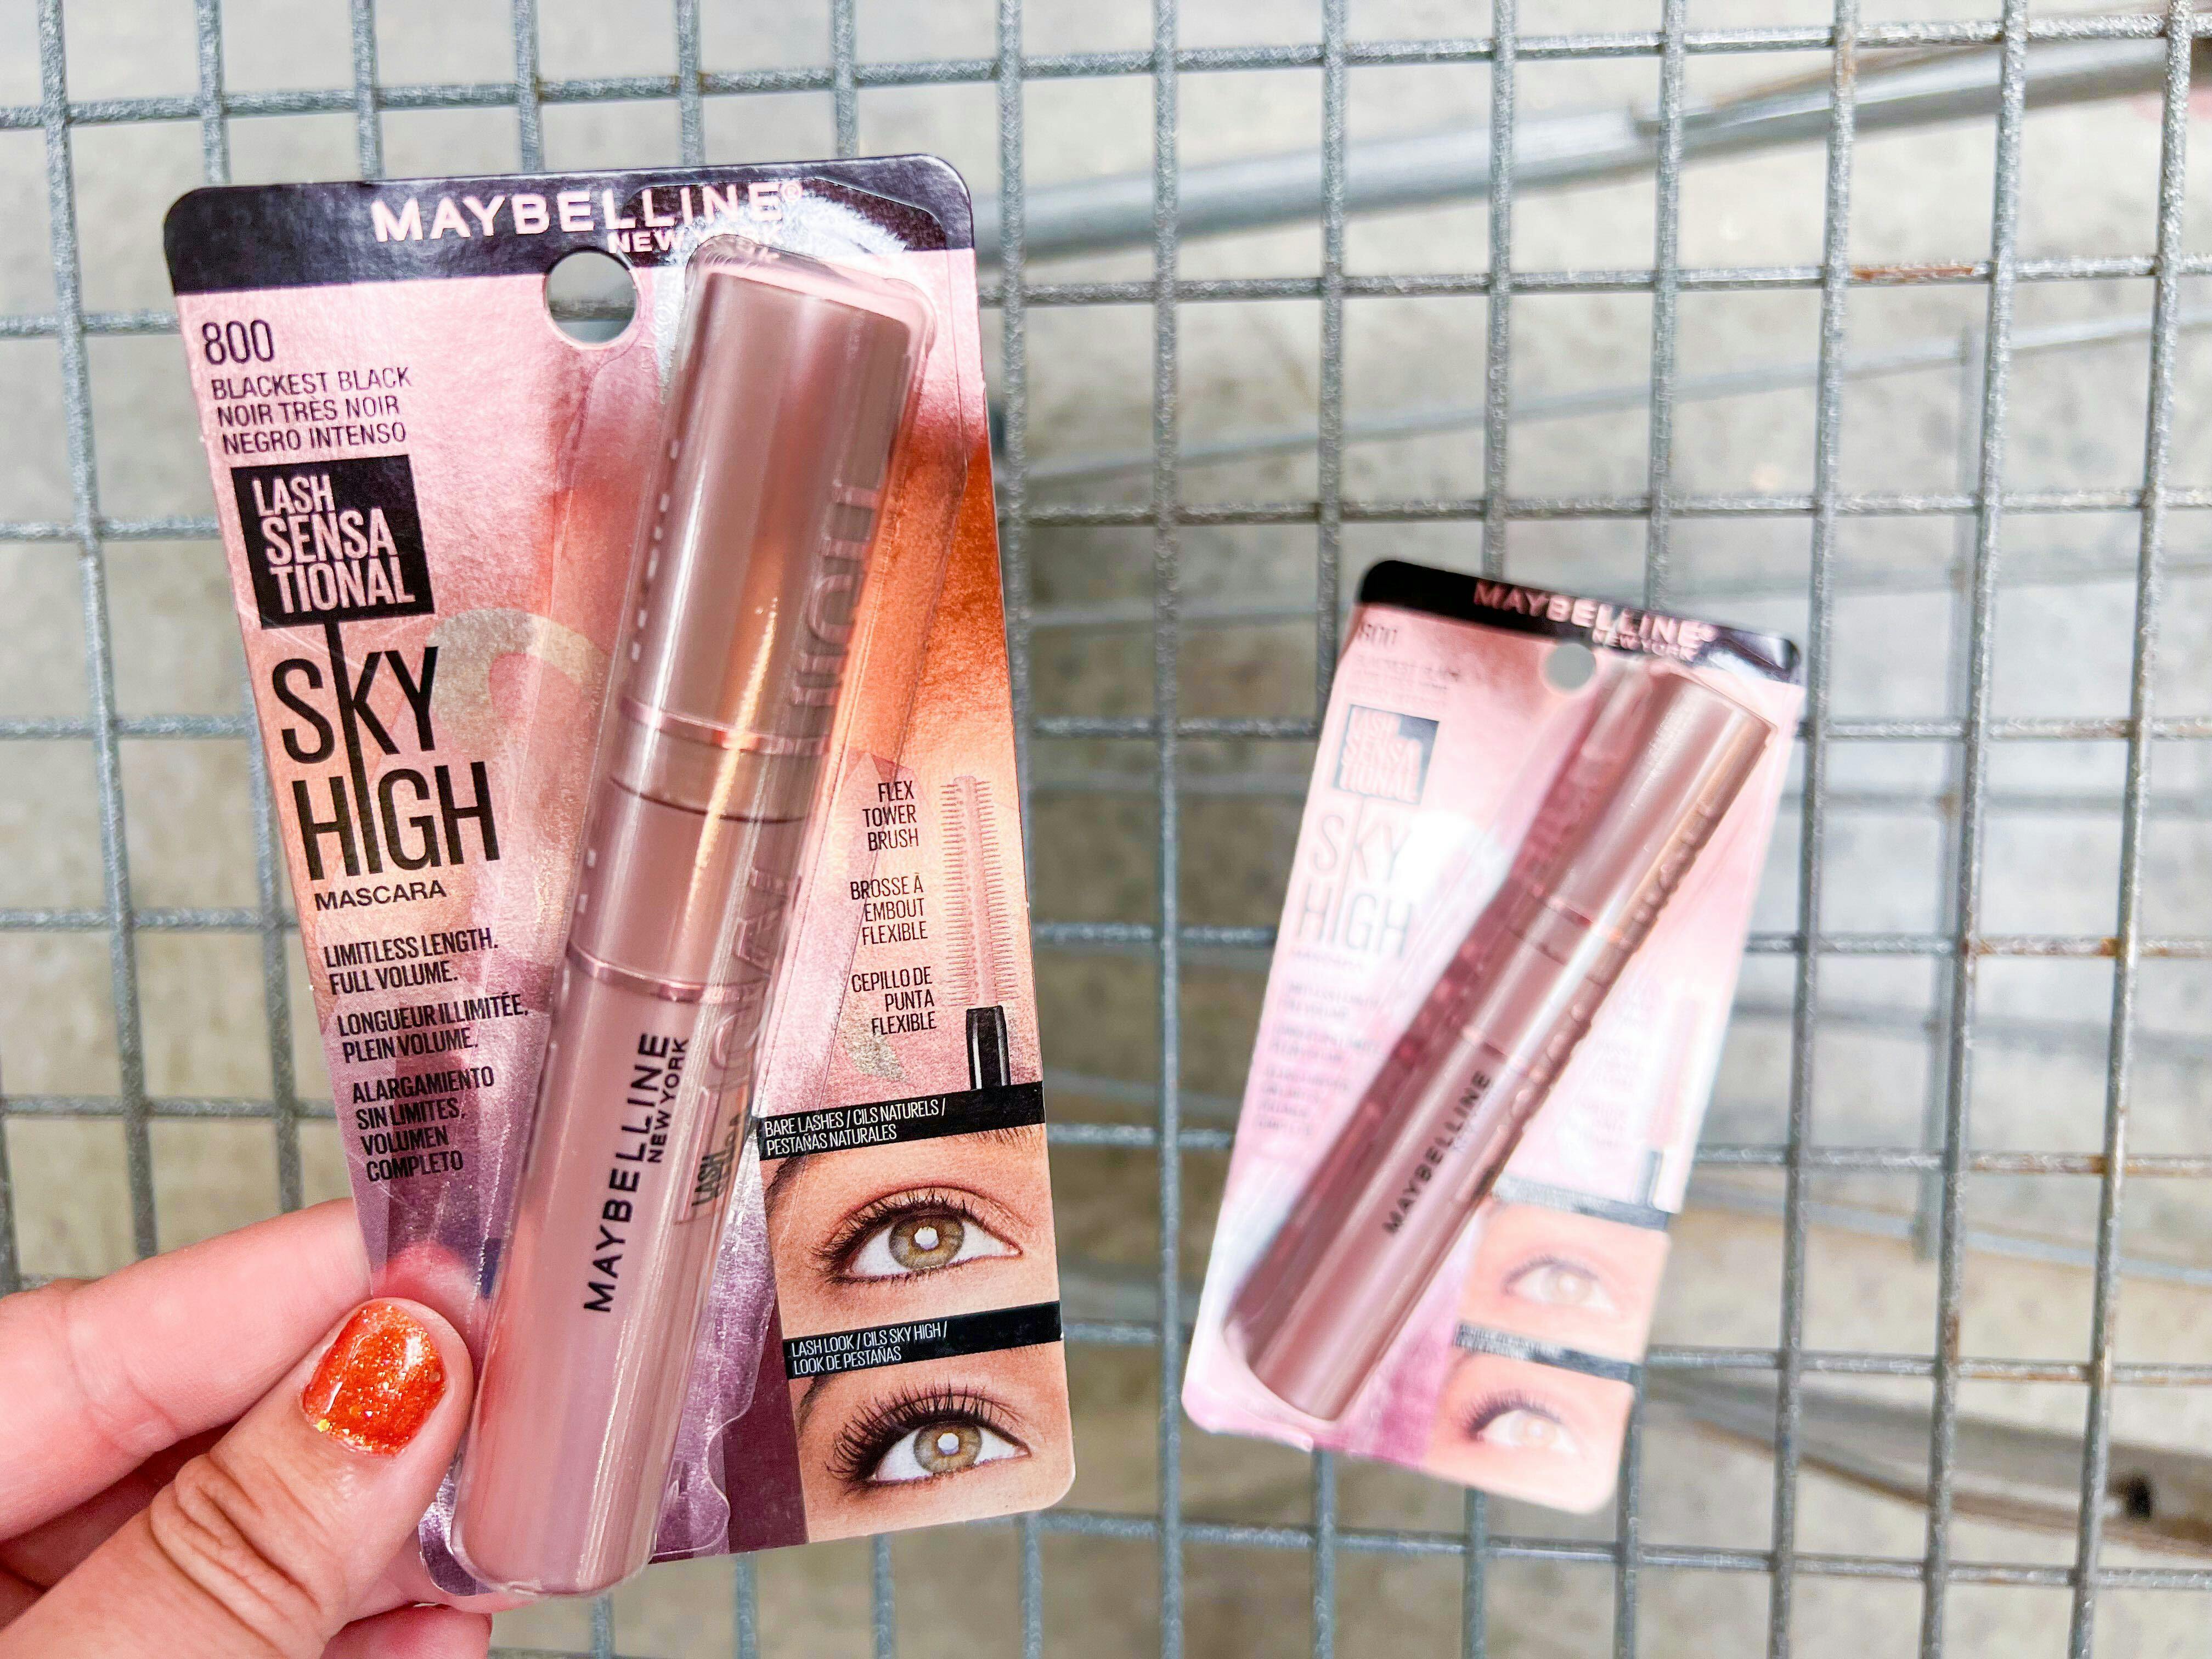 Hand holding two packs of Maybelline Sky High mascara